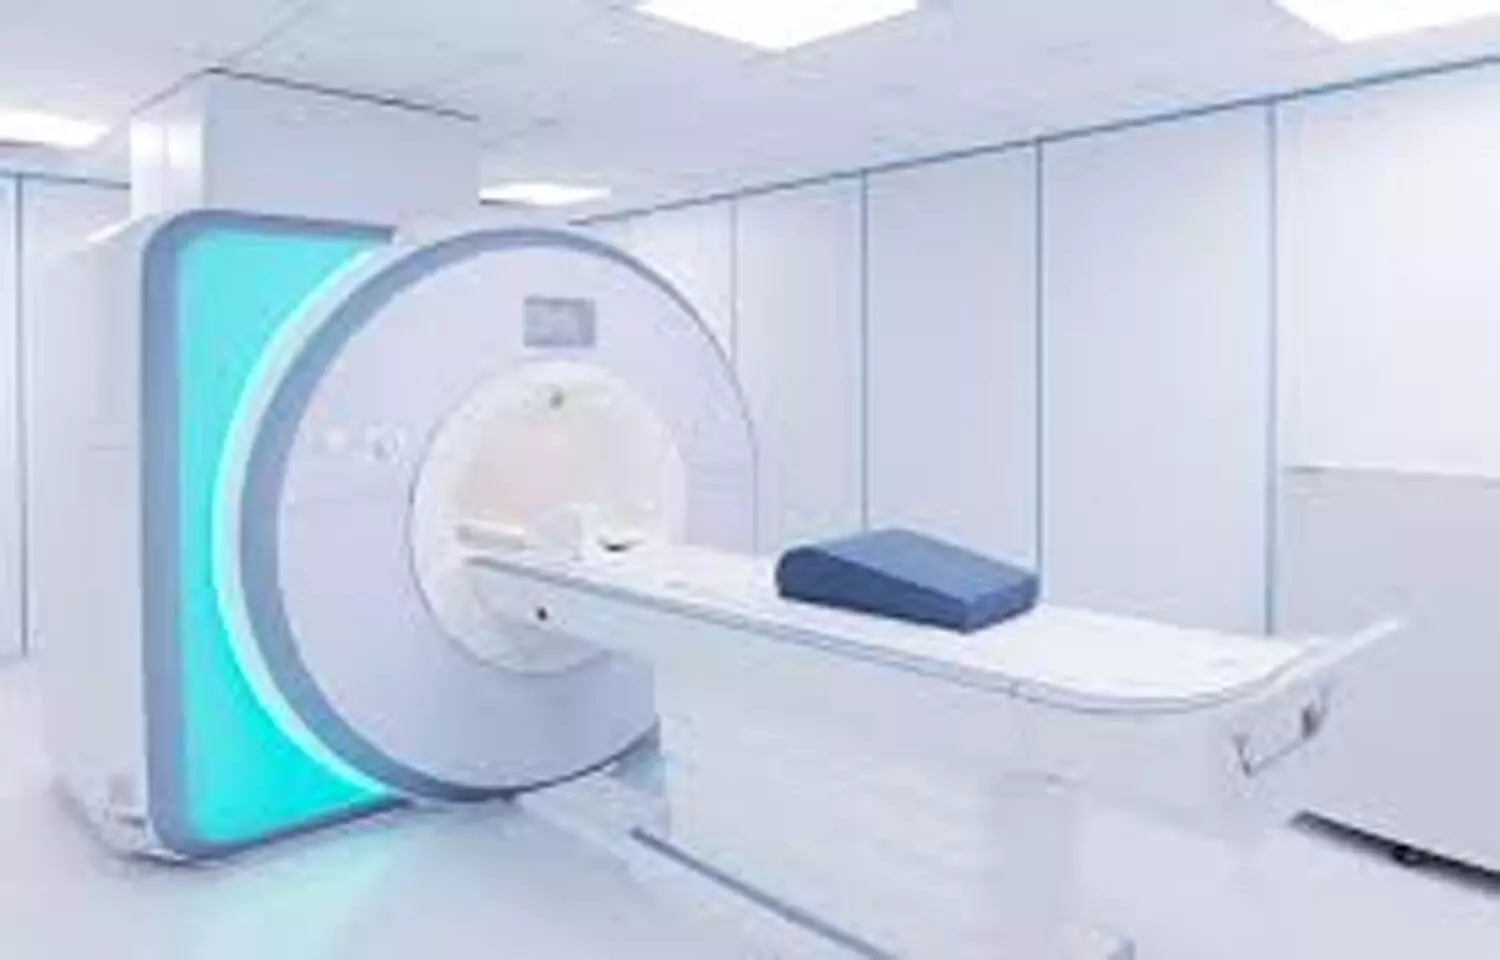 Researchers develop interactive VR technology for improving MRI experience